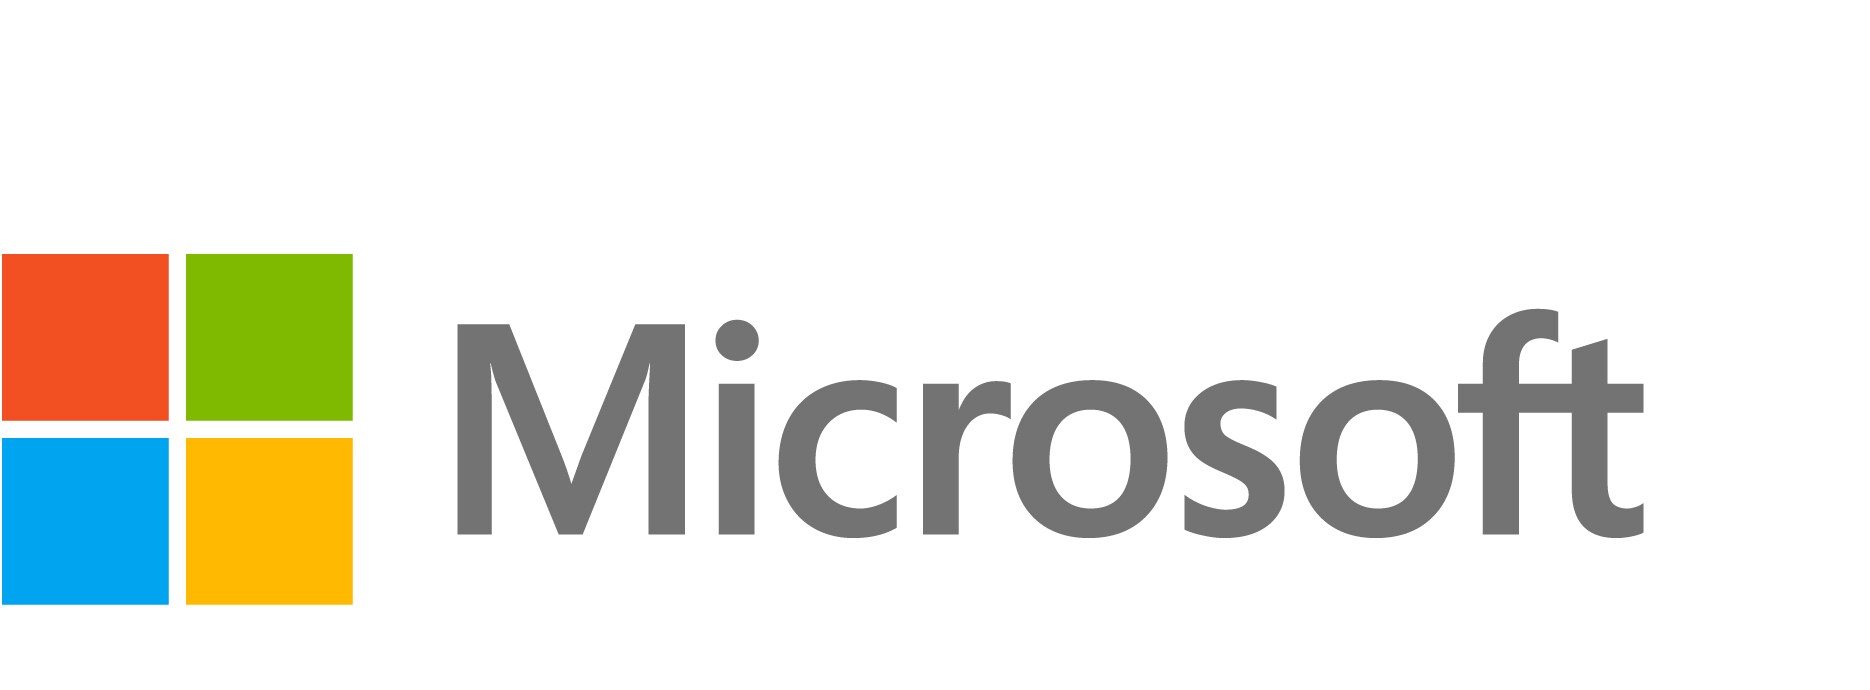 Microsoft Visual Studio Enterprise with MSDN - step-up license & software assurance - 1 license